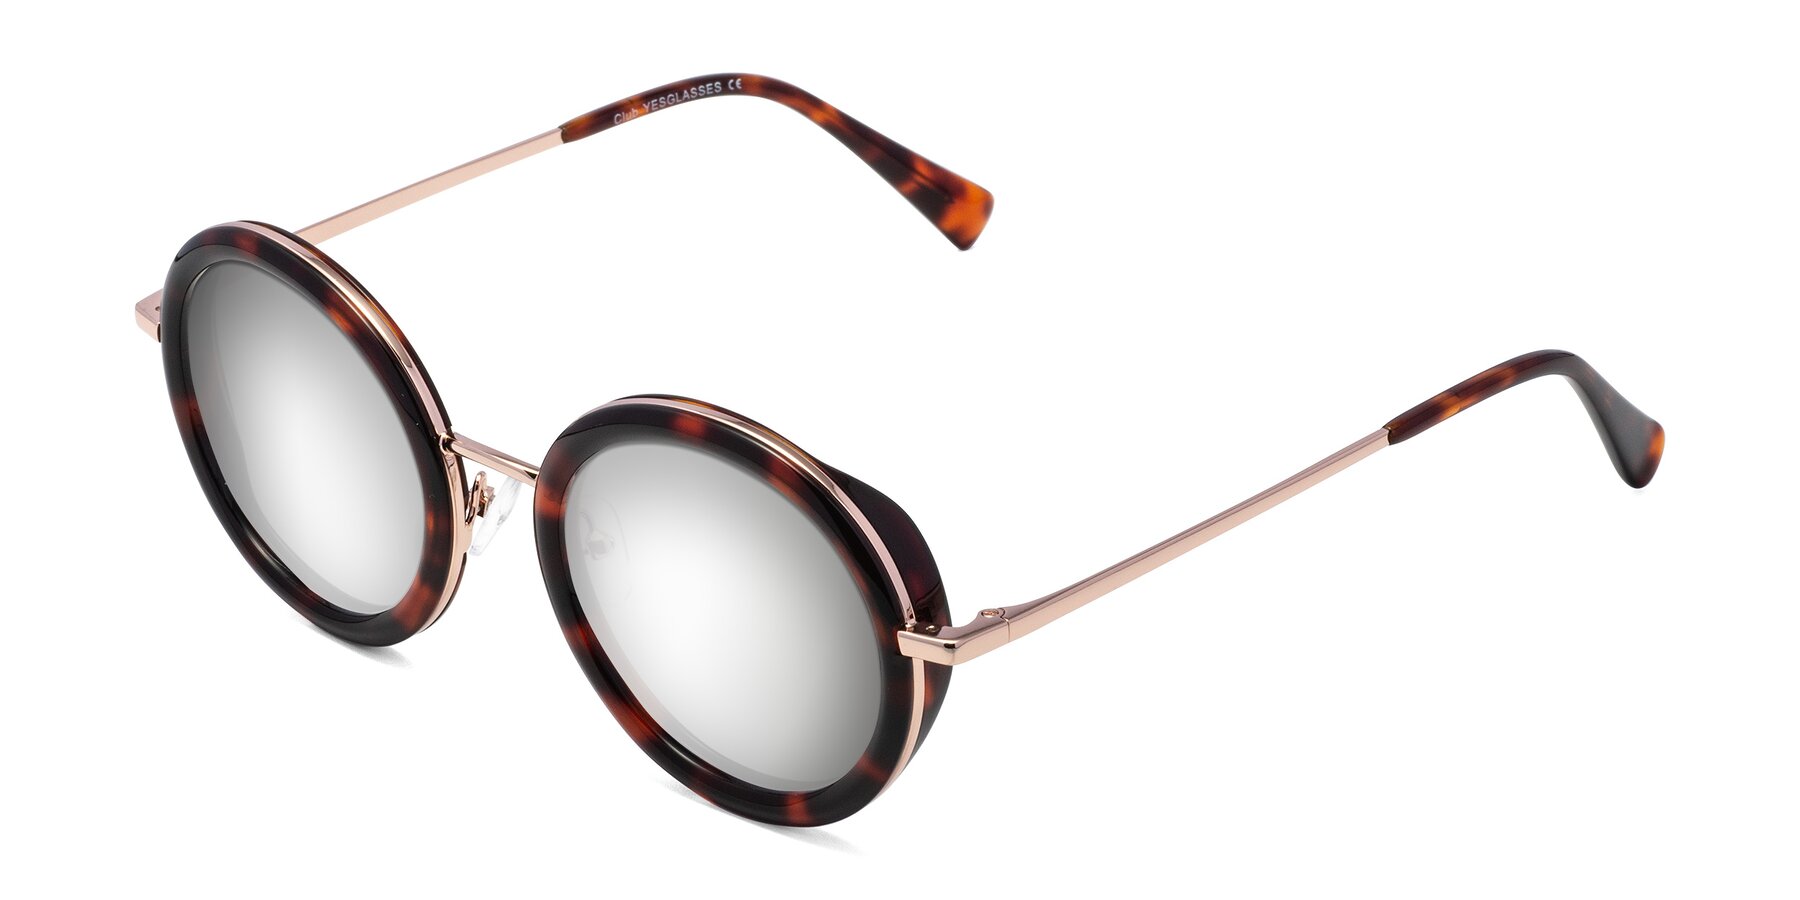 Angle of Club in Tortoise-Rose Gold with Silver Mirrored Lenses